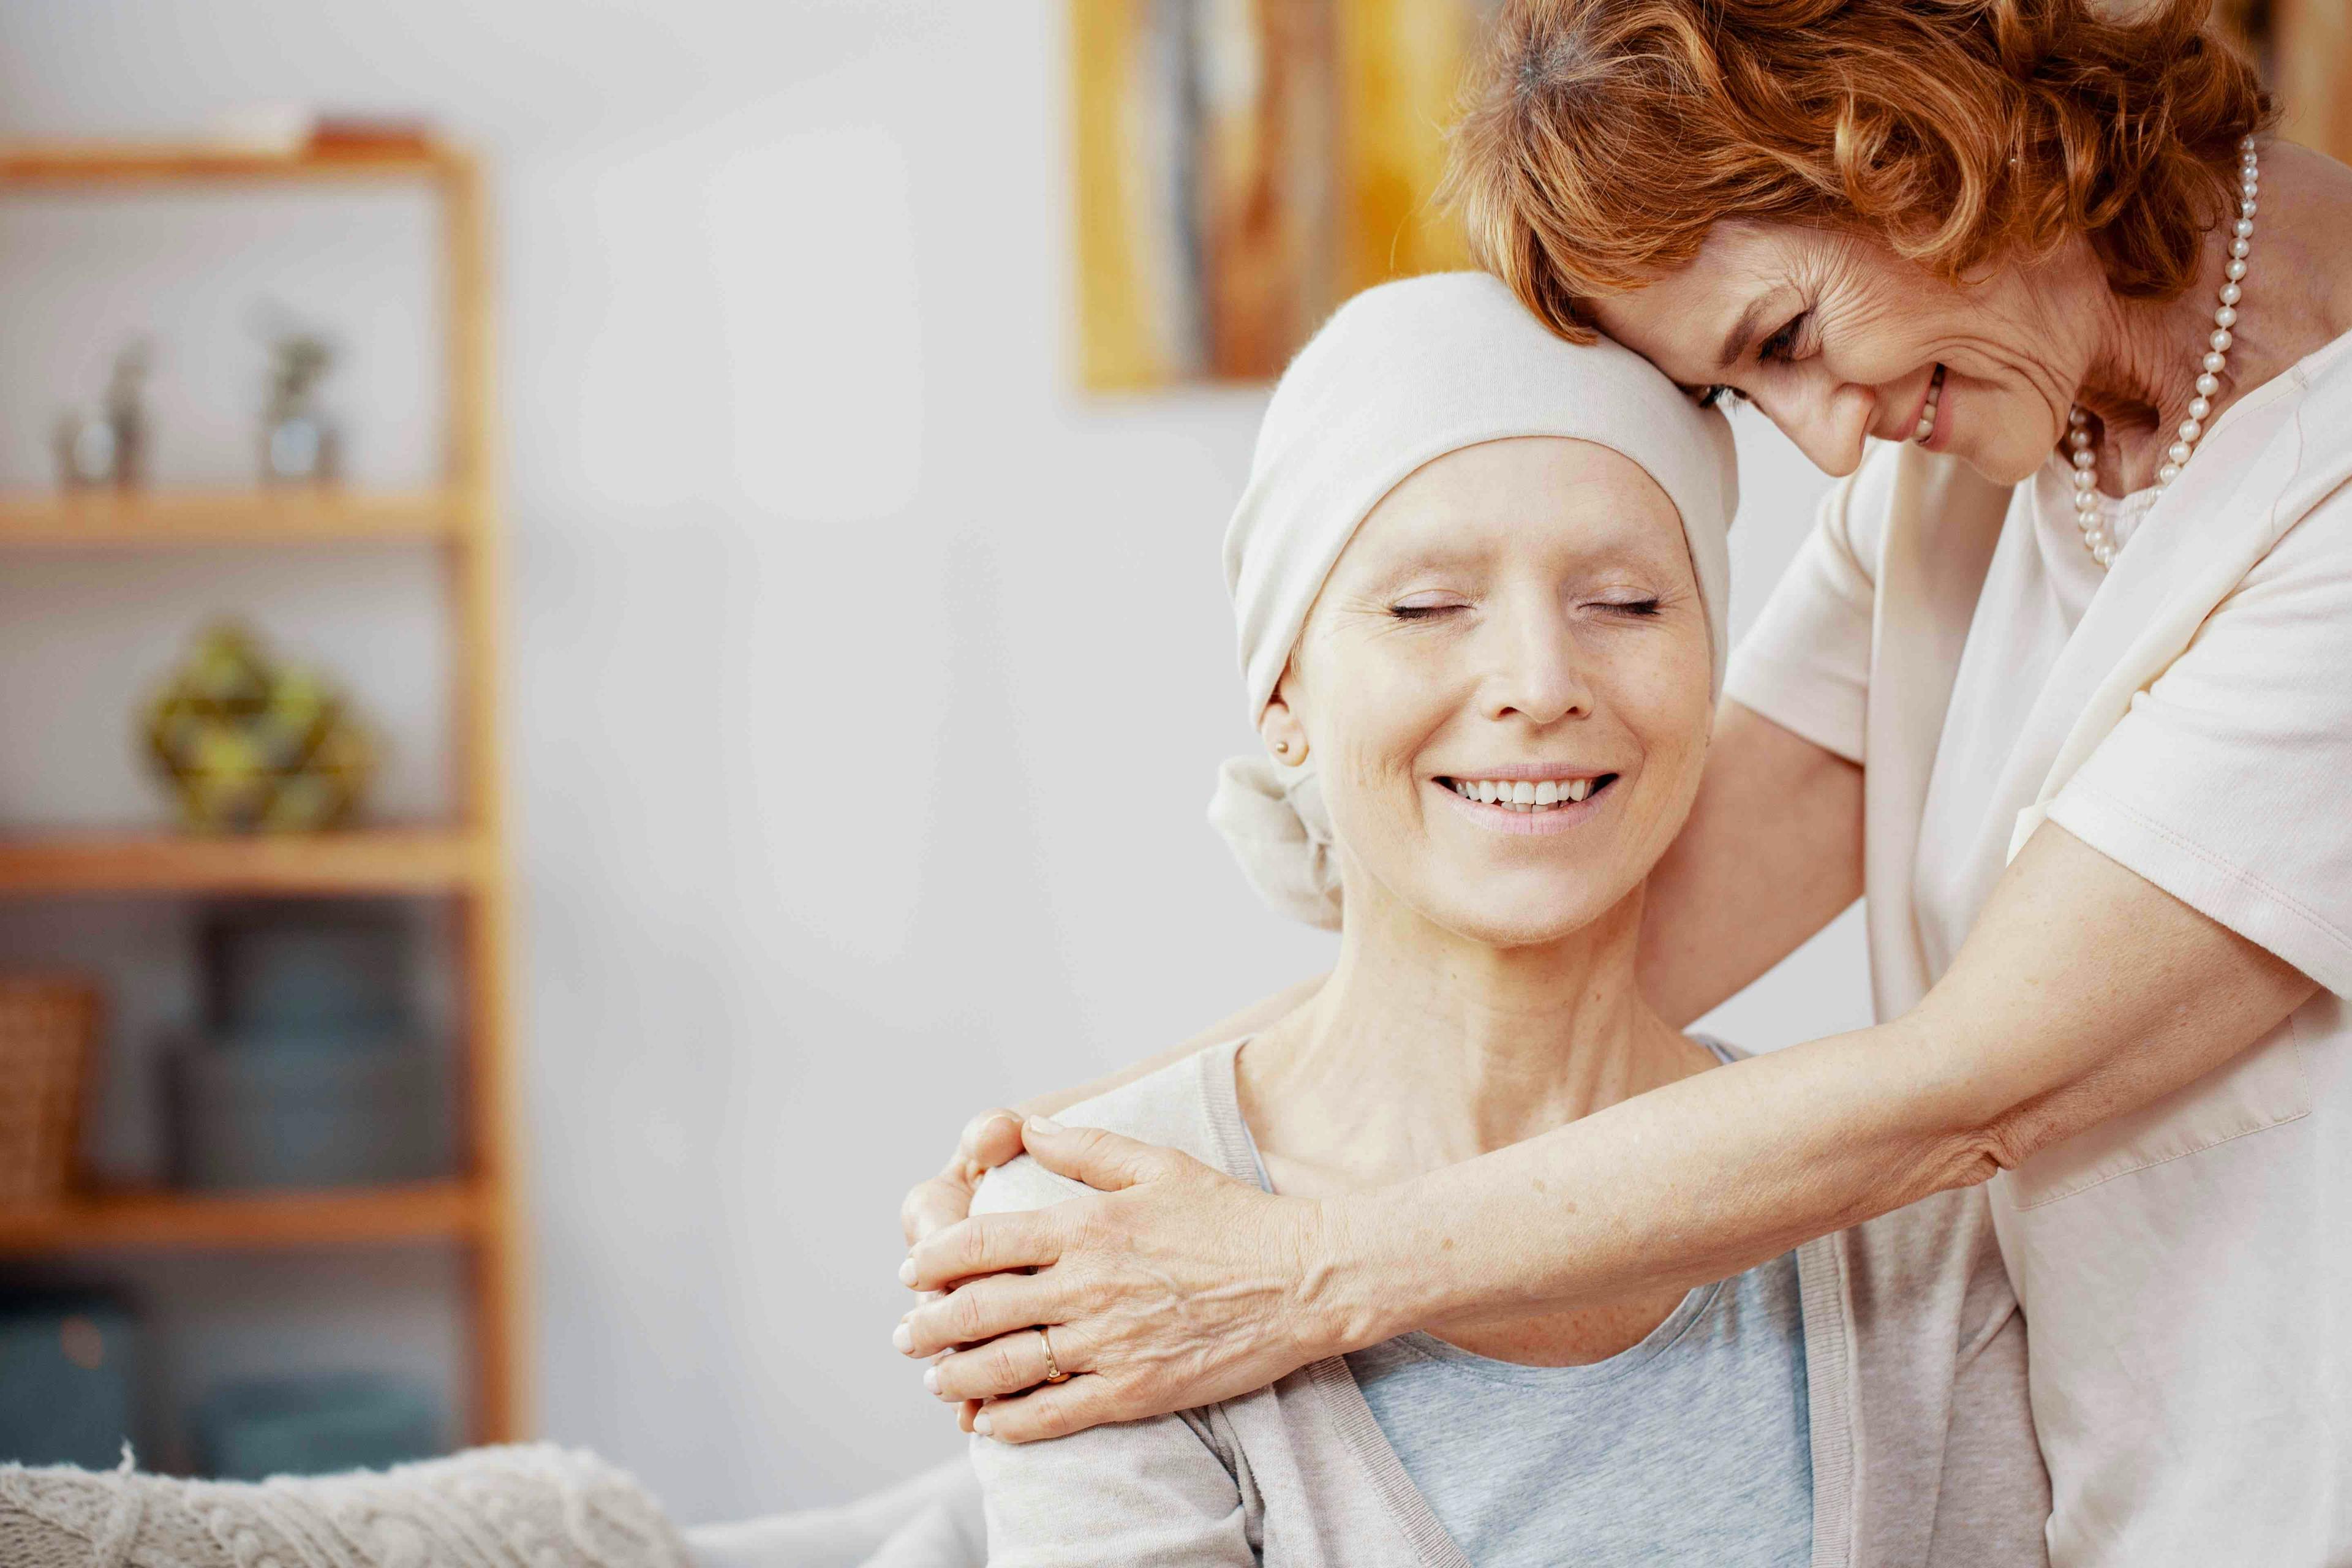 Woman comforting another woman with cancer | Image credit: Photographee.eu - stock.adobe.com